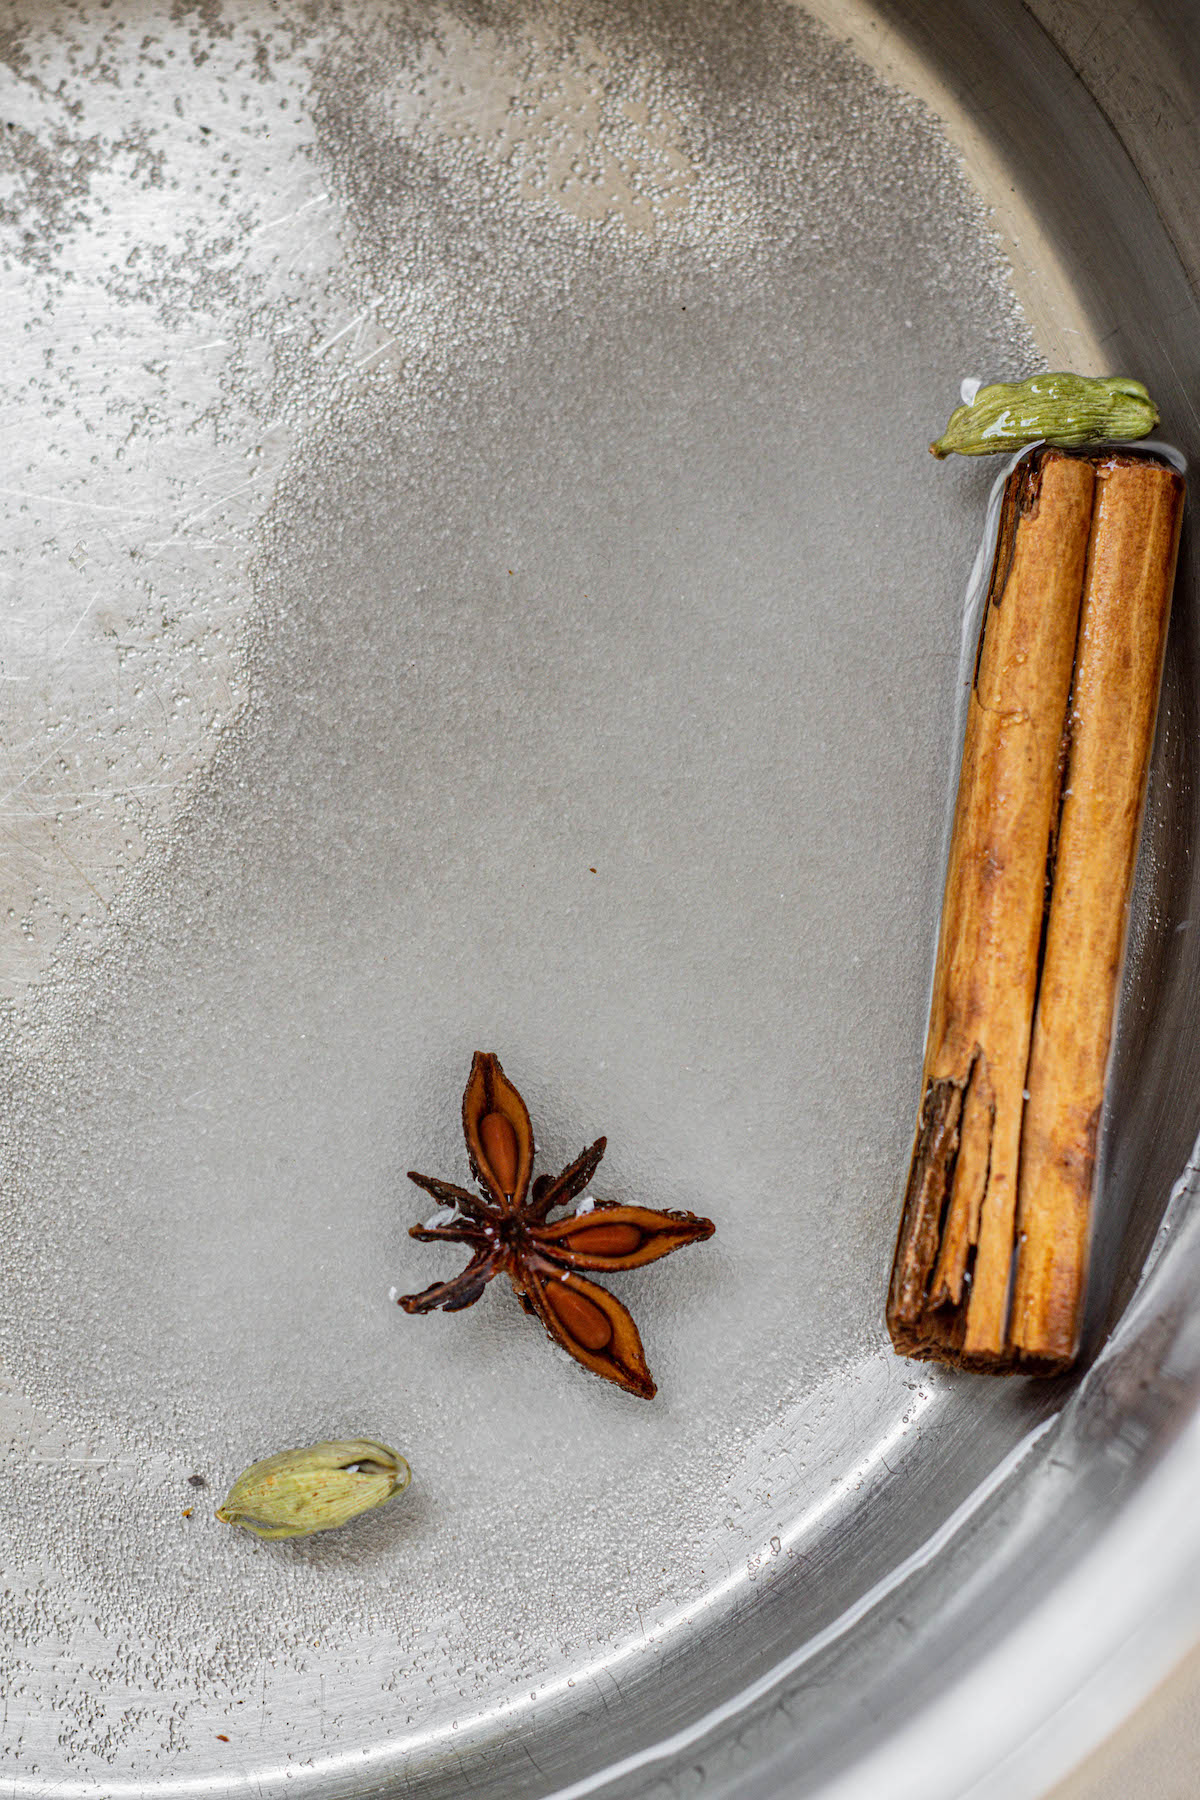 cinnamon stick, cardamom pods and star anise in water.